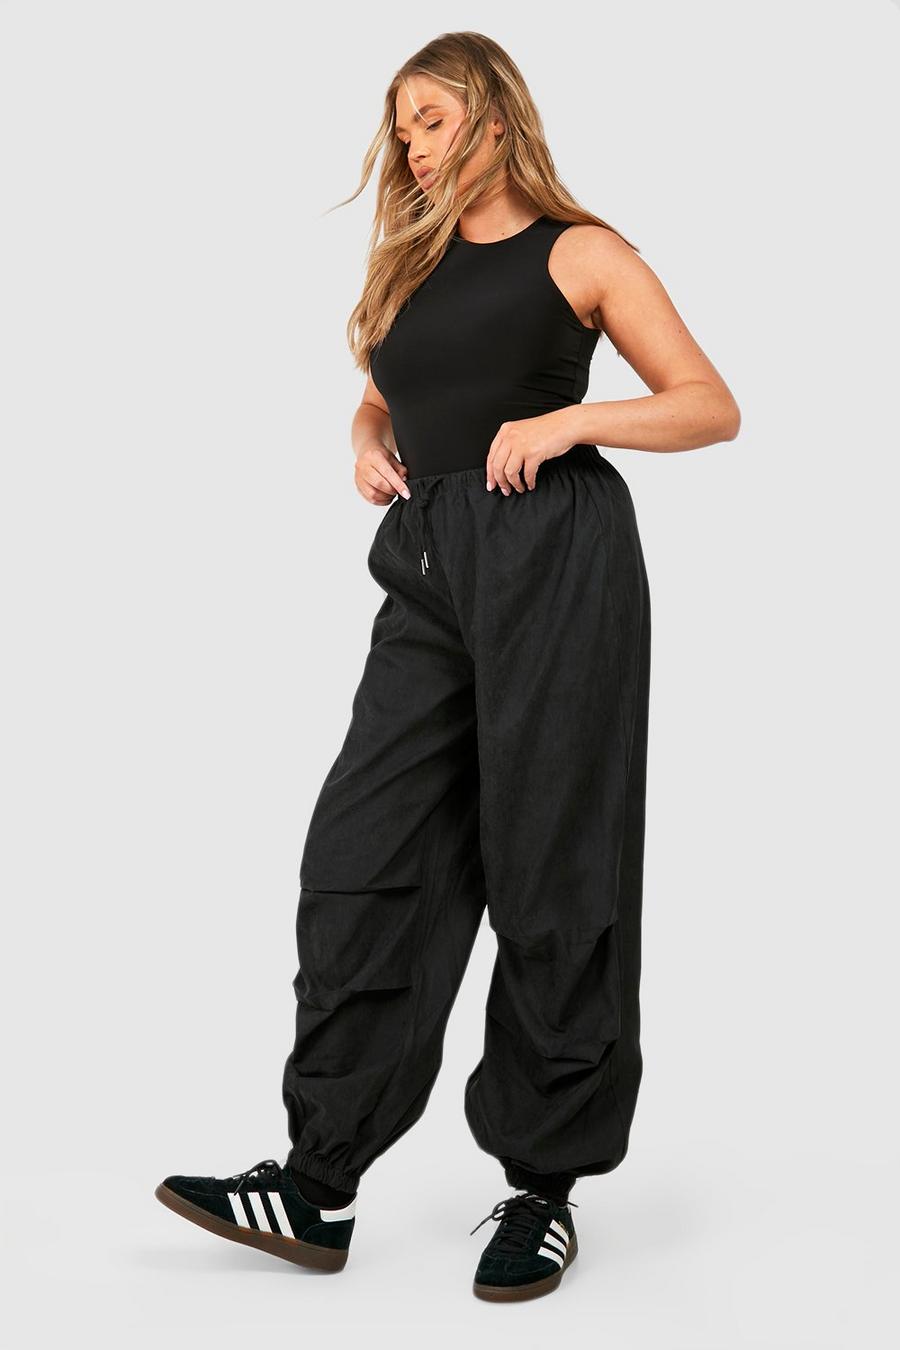 Shop Generic (Black)Cargo Pants Women Plus Size Belt Less High Waisted Wide  Leg Trousers Straight Leg Relaxed Style Trousers Trousers XXA Online